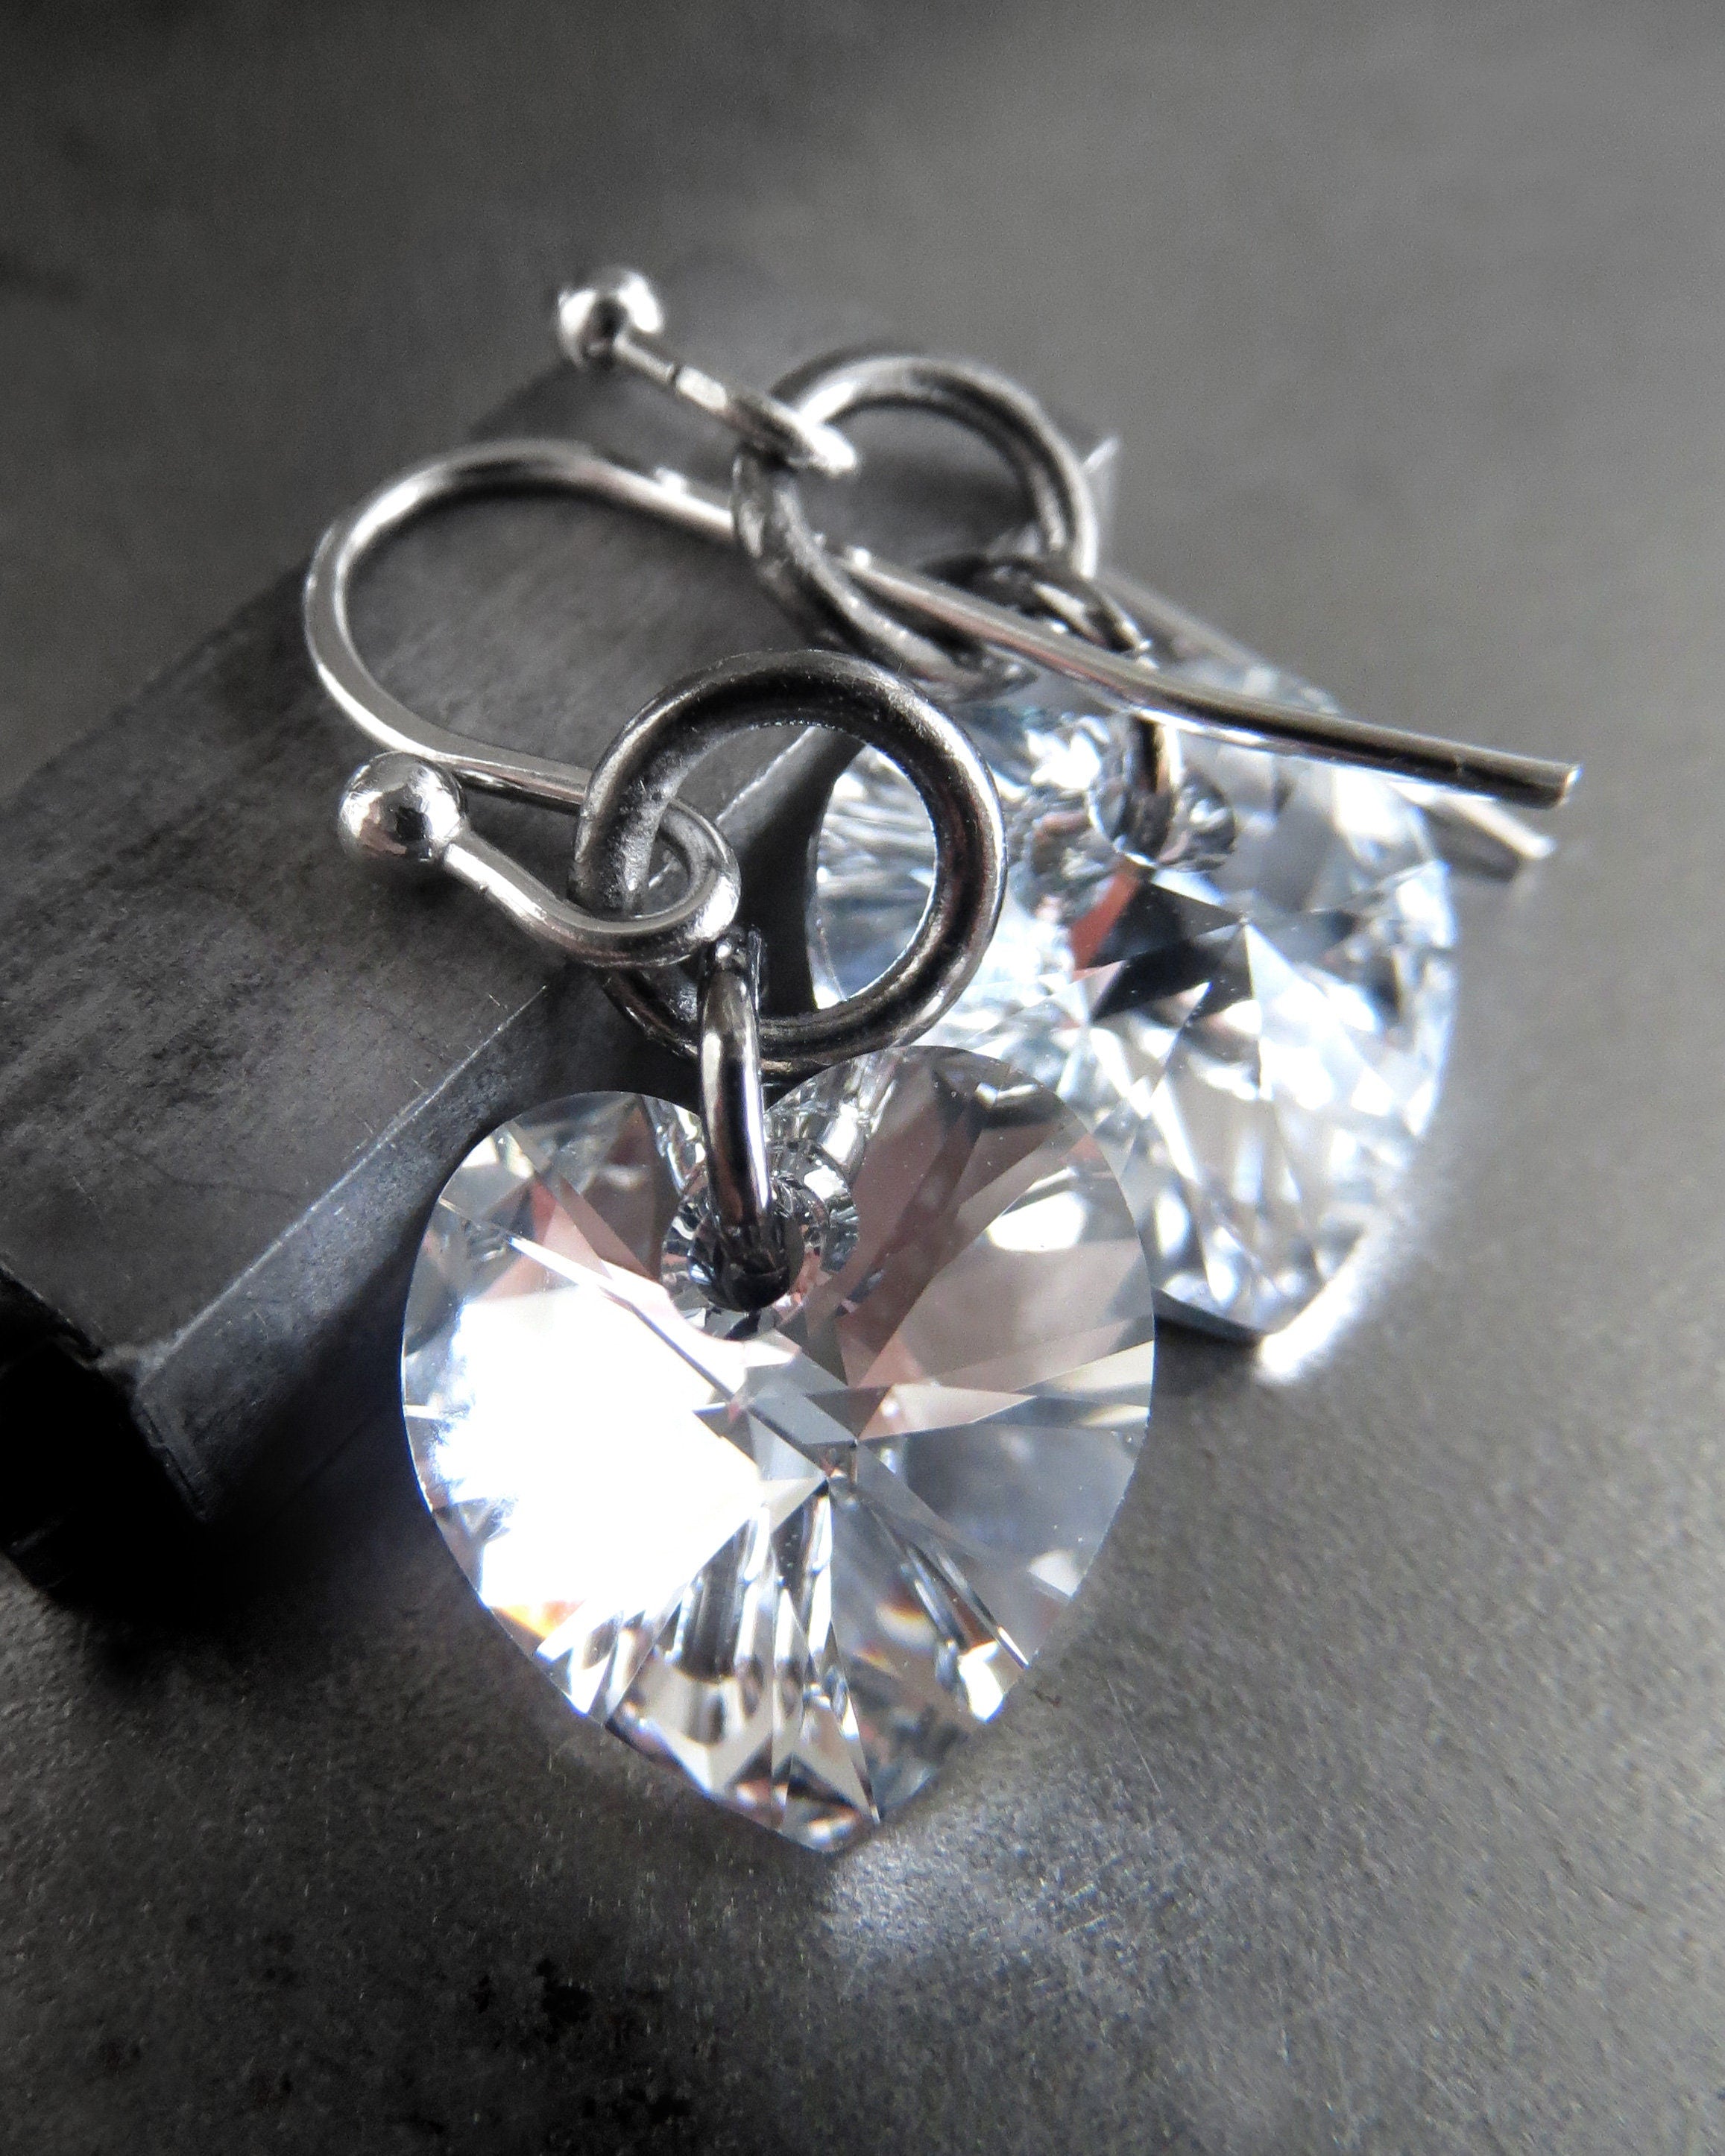 Super Sparkly Small Crystal Heart Earrings - Brilliant Flash and Sparkle - Romantic Clear Crystal Heart Earrings, Valentines Day Jewelry